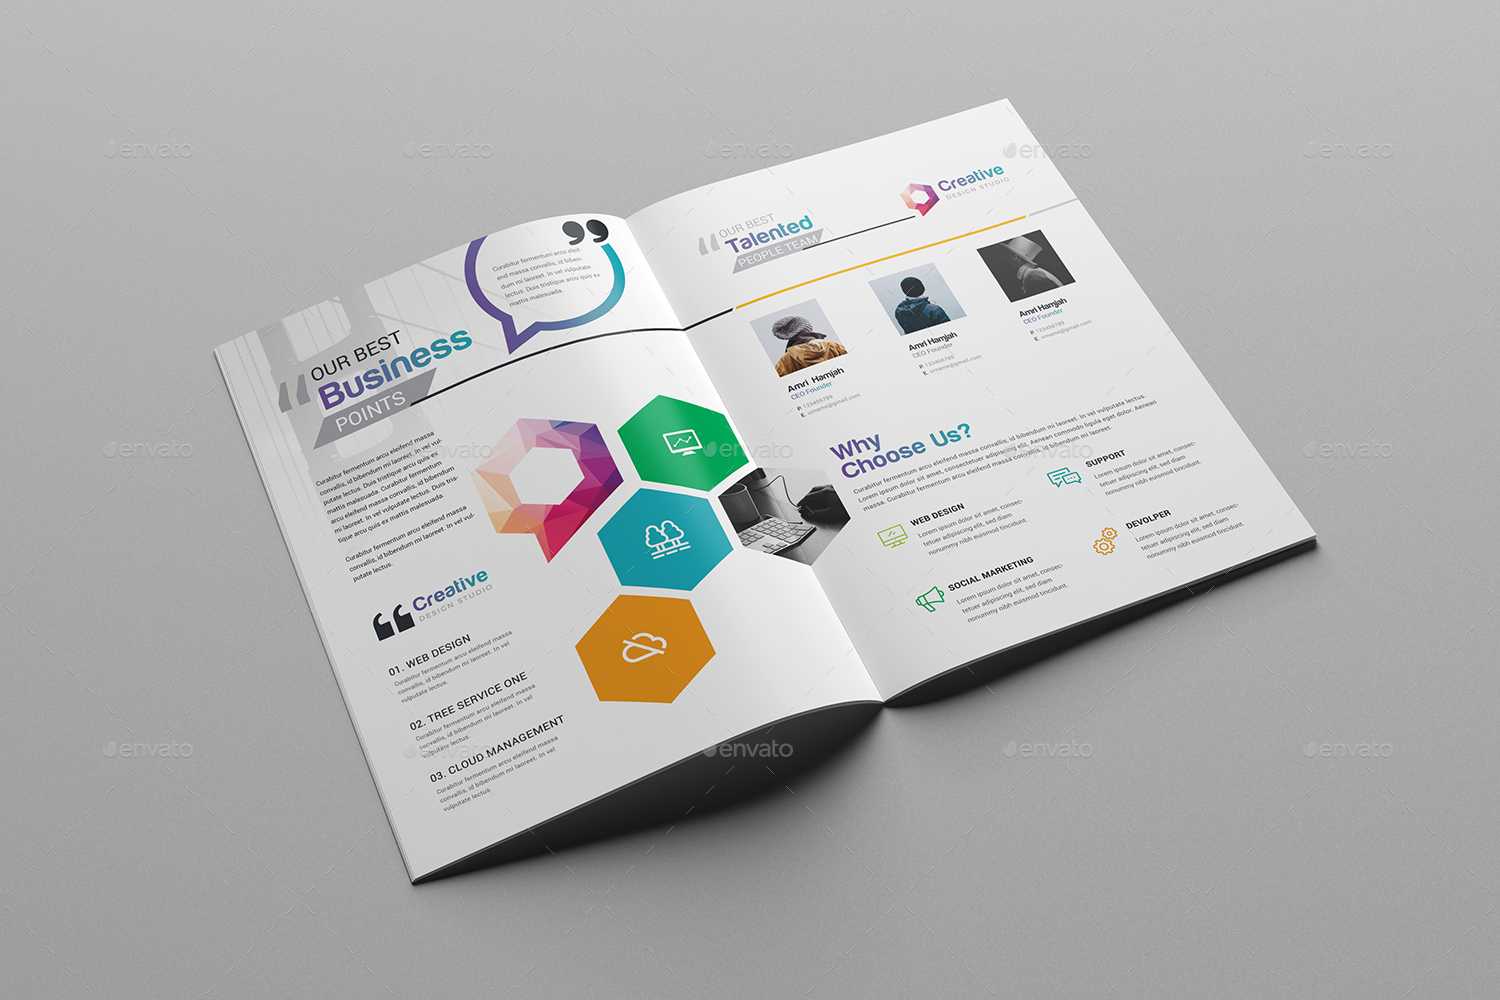 027 Fold Brochure Template Free Download Psd 02 Bifold Image Regarding Two Fold Brochure Template Psd